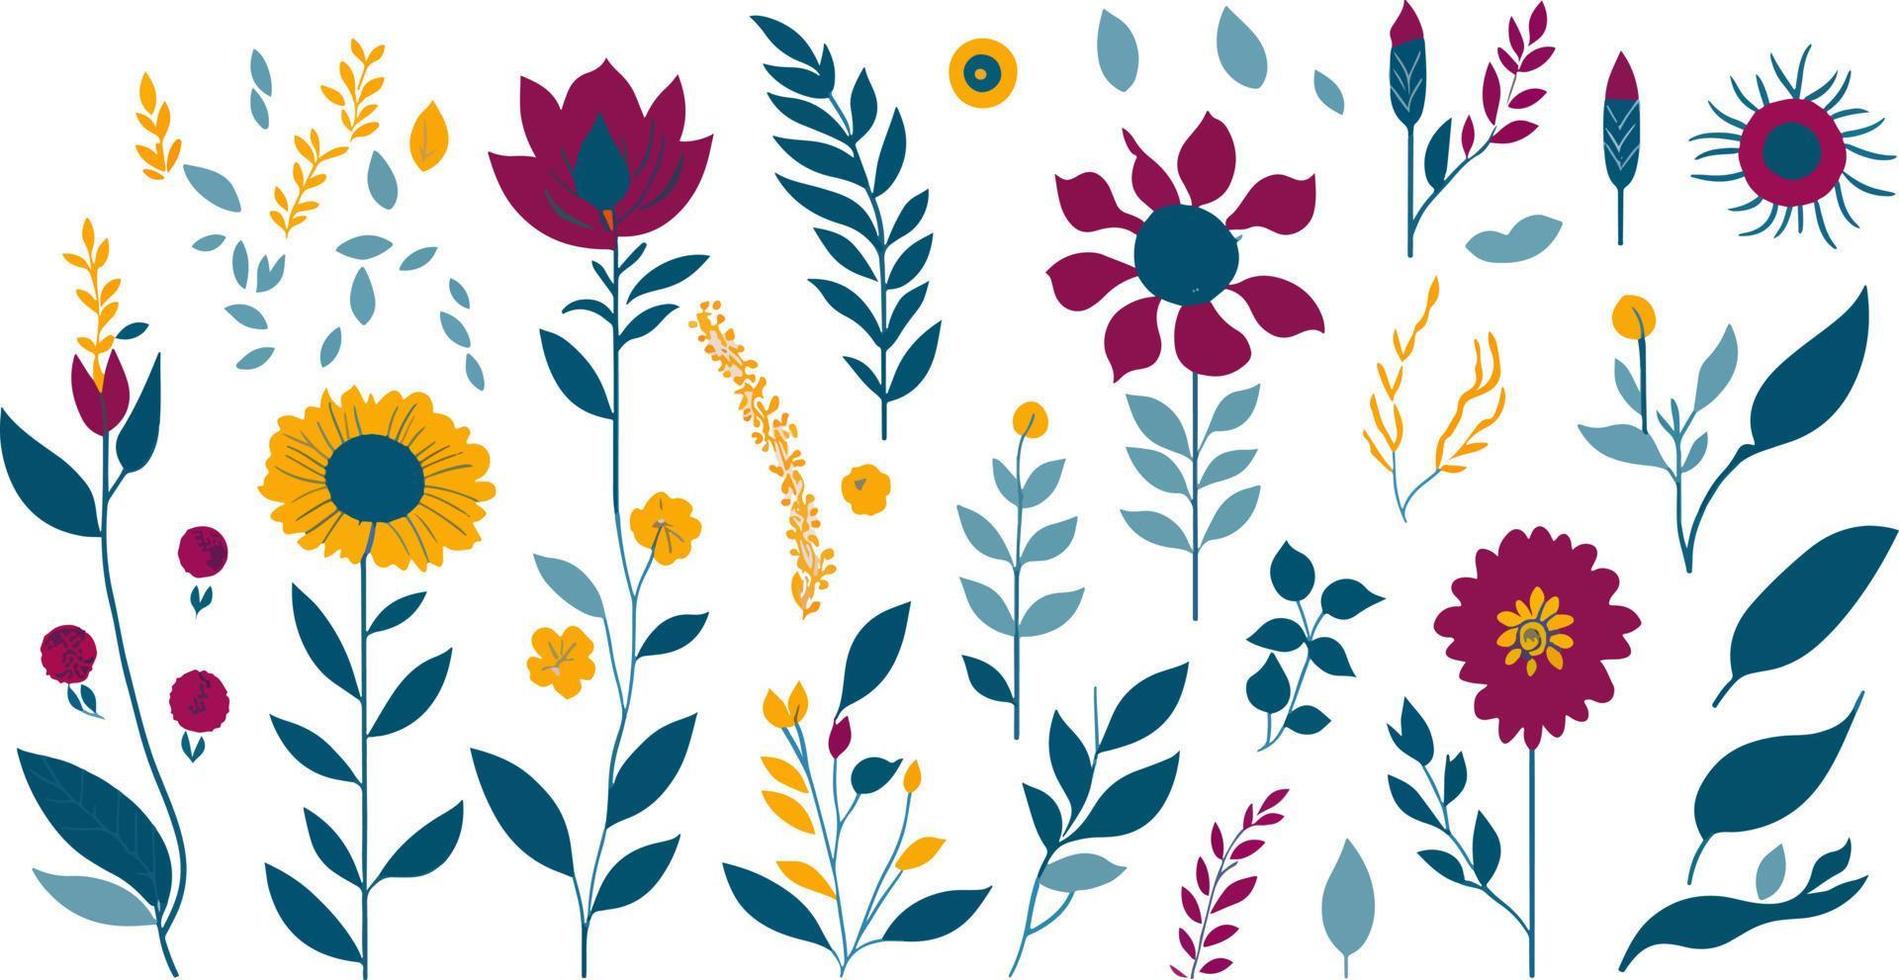 Wildflowers, Plants, and Herbs. A Simple and Elegant Set of Floral Elements vector